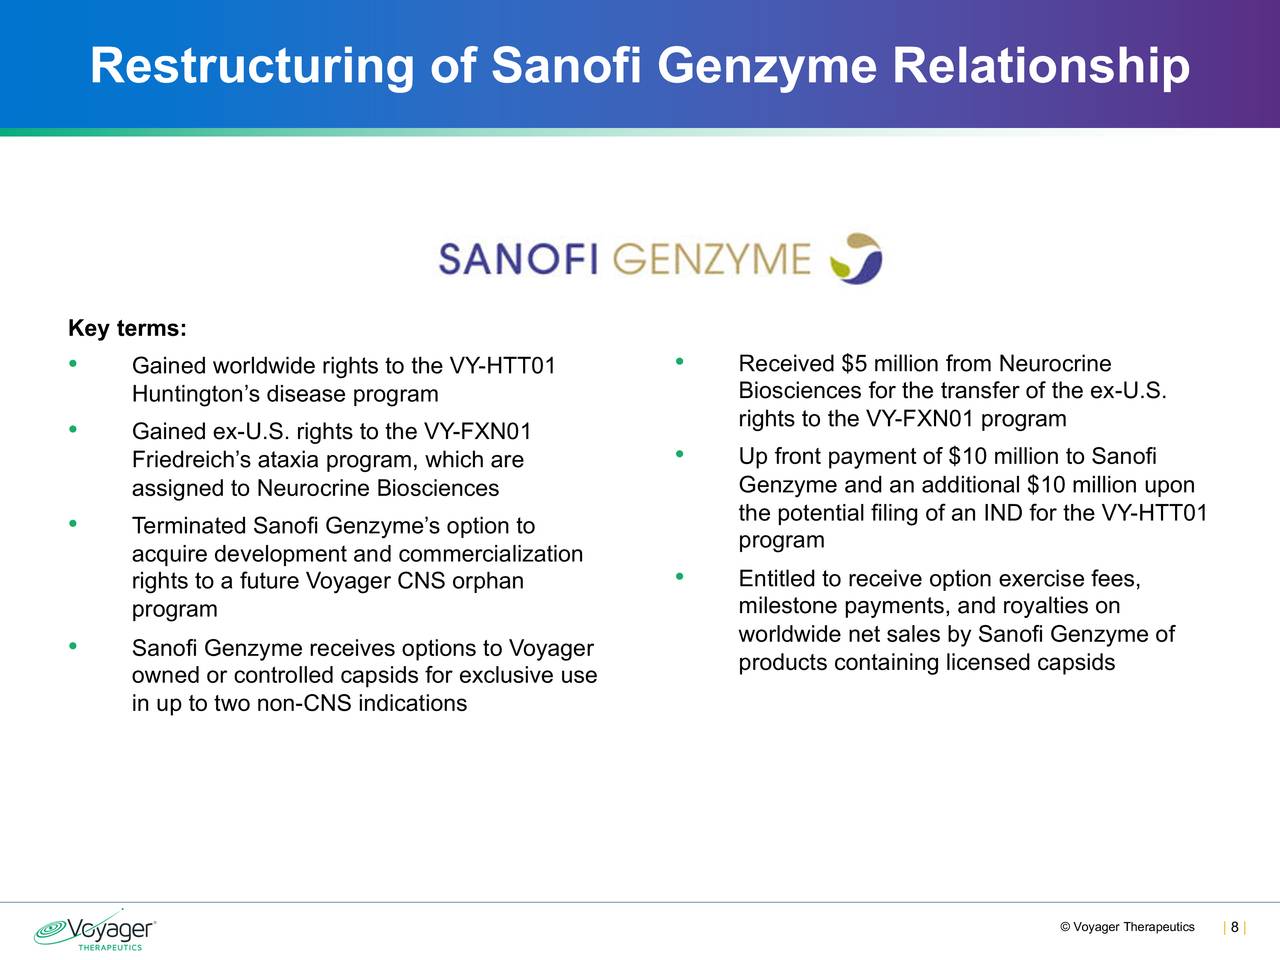 Restructuring of Sanofi Genzyme Relationship